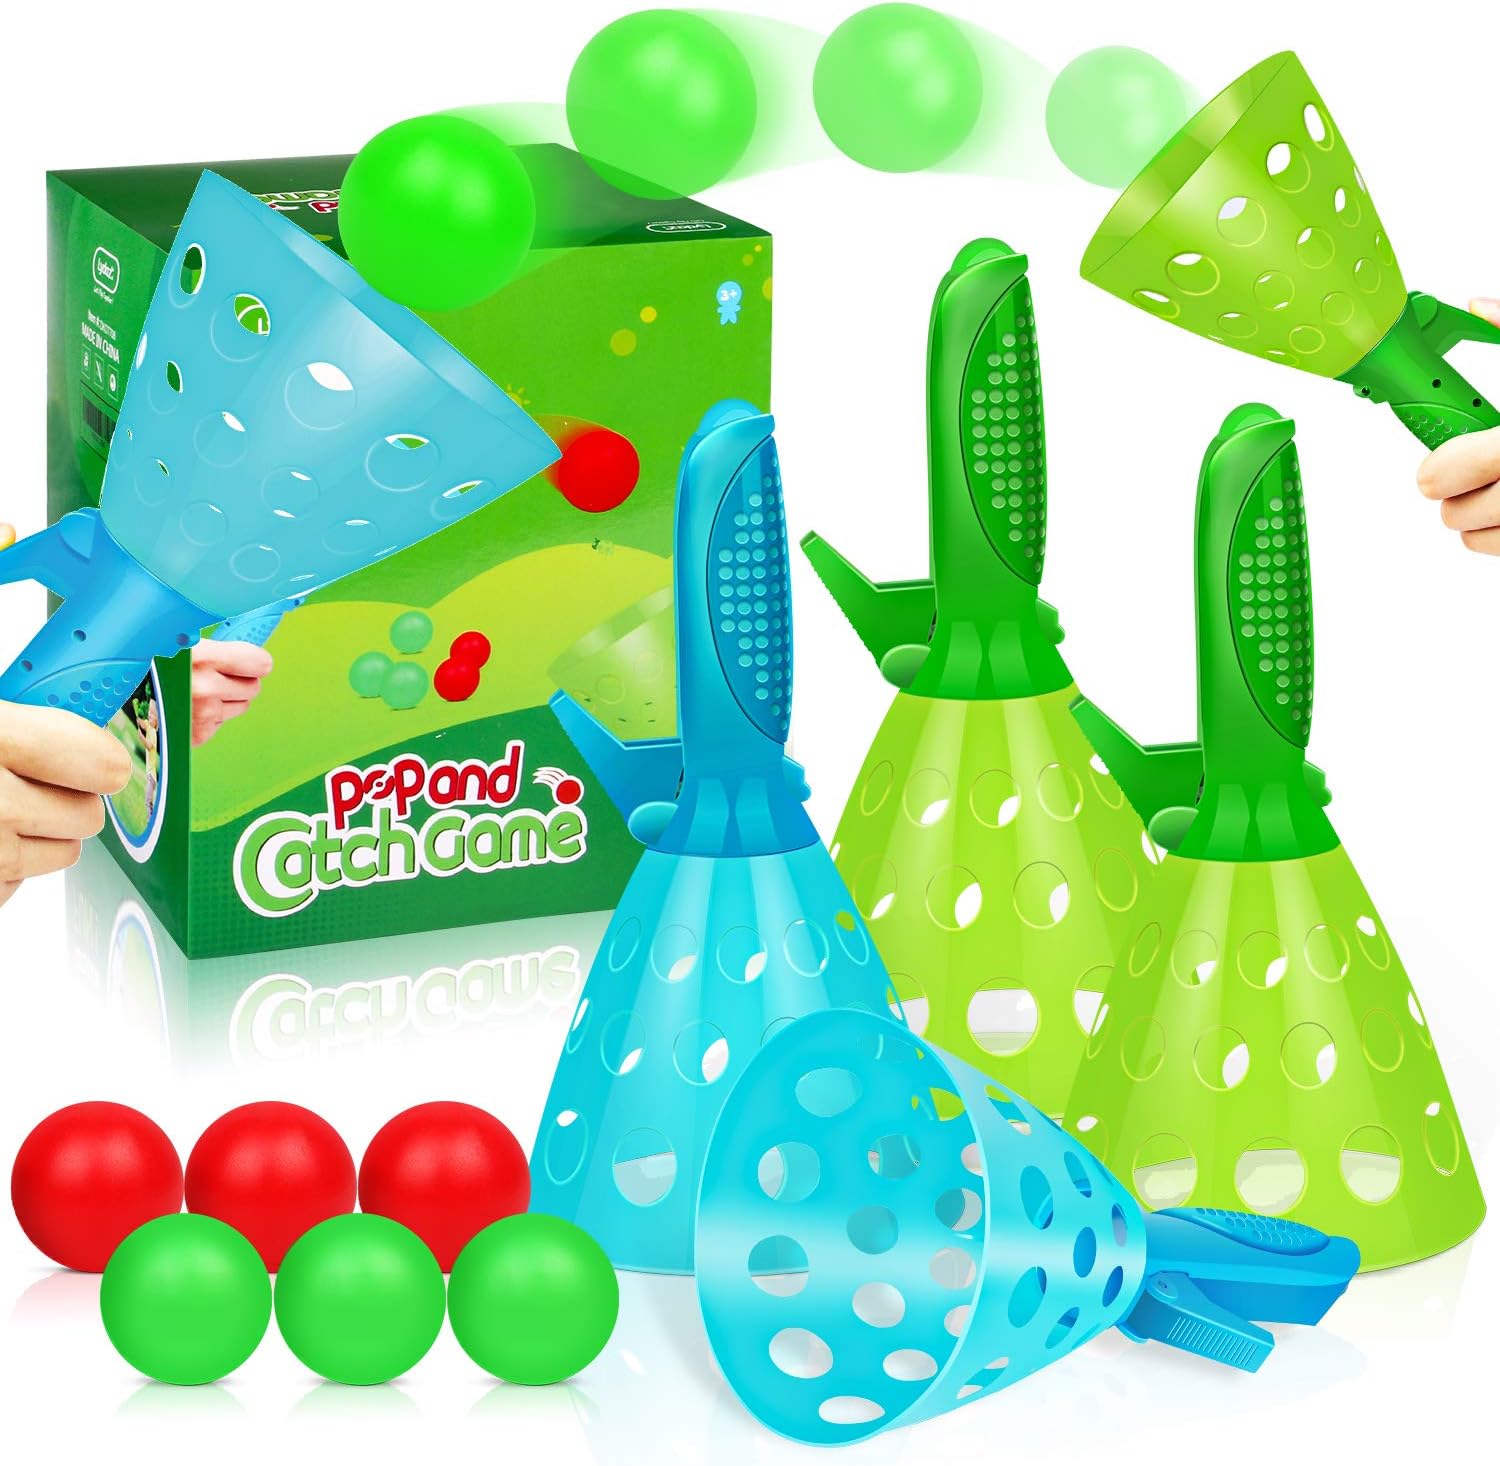 Outdoor Indoor Game Activities for Kids, Pop-Pass-Catch Ball Game with 4 Catch Launcher Baskets and 6 Balls, Halloween Christmas Party Favors Gift Beach Sport Toys for Kids Age 5 6 7 8 9 10+ and Adult : Toys Games